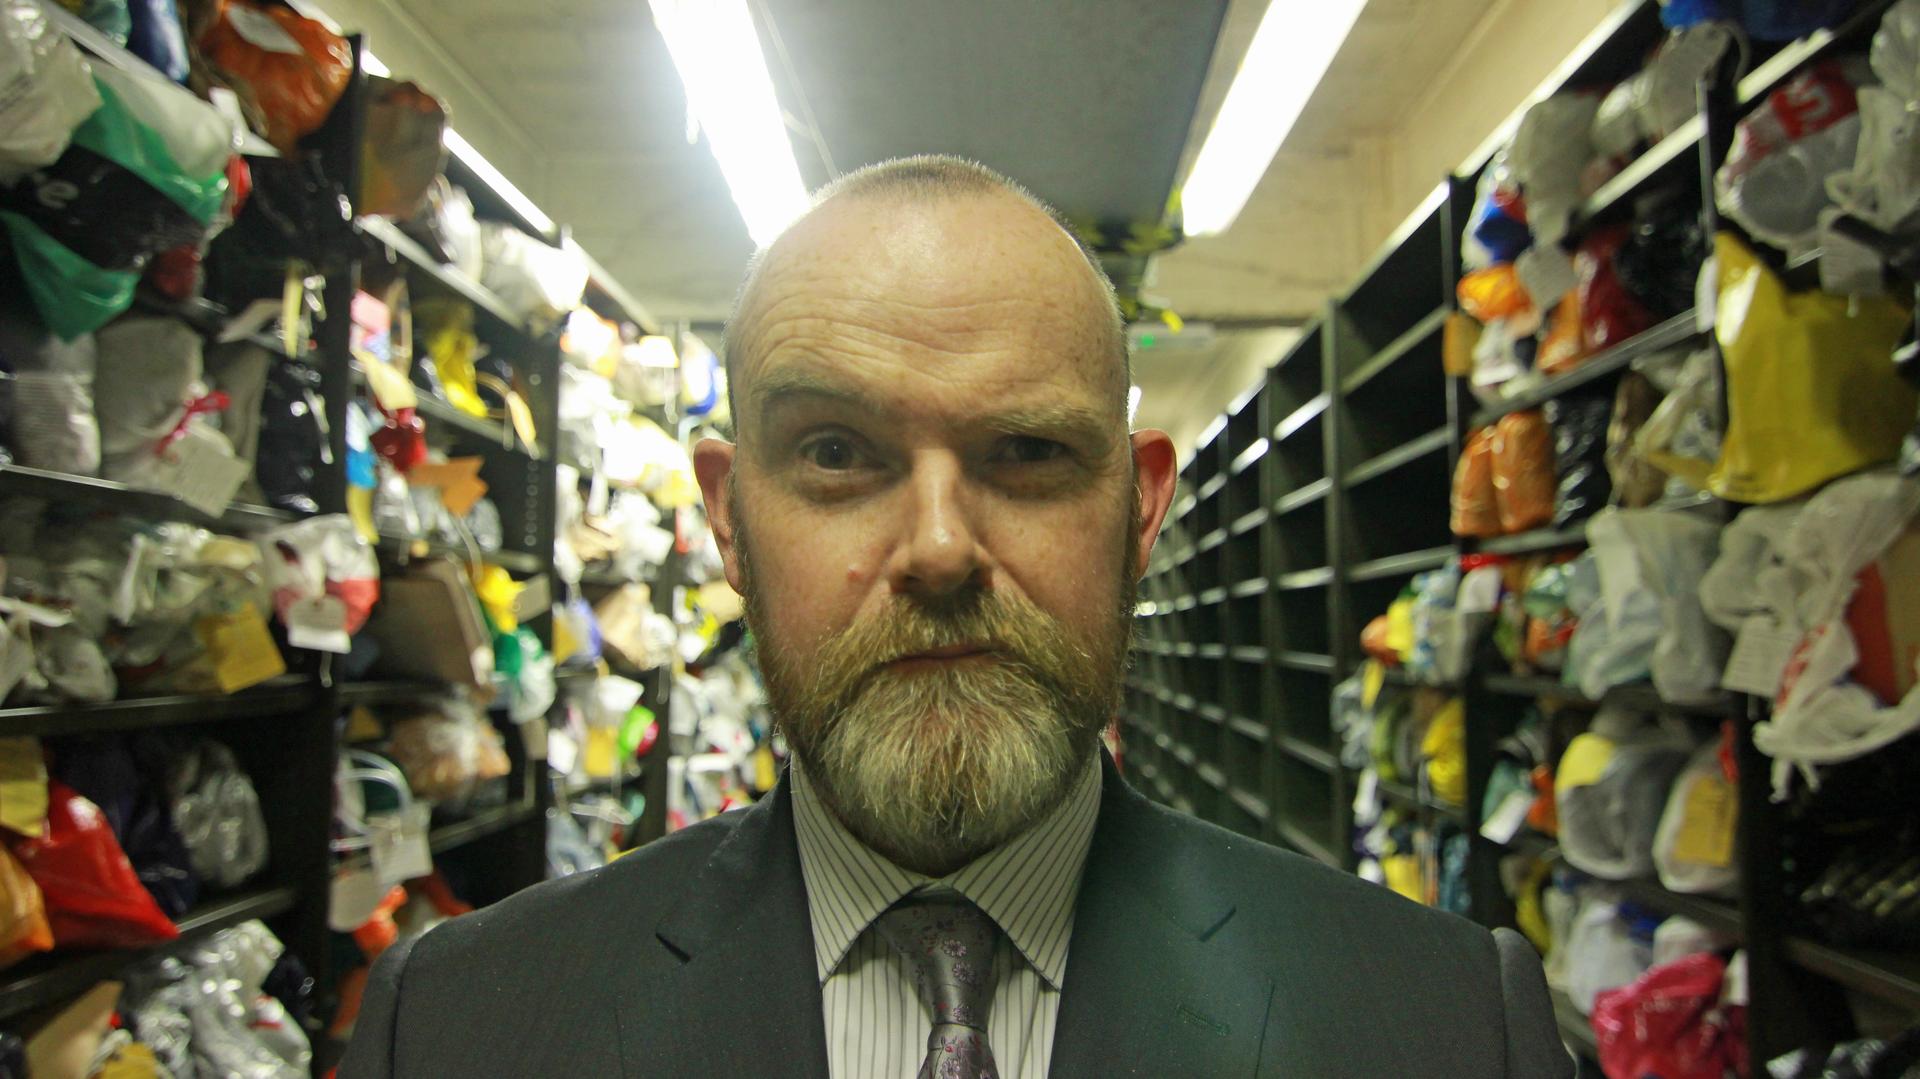 Paul Cowan is the Manager of Transport for London's Lost Property Office. His warehouse hold 300,000 lost objects ranging from prosthetic limbs to ipads